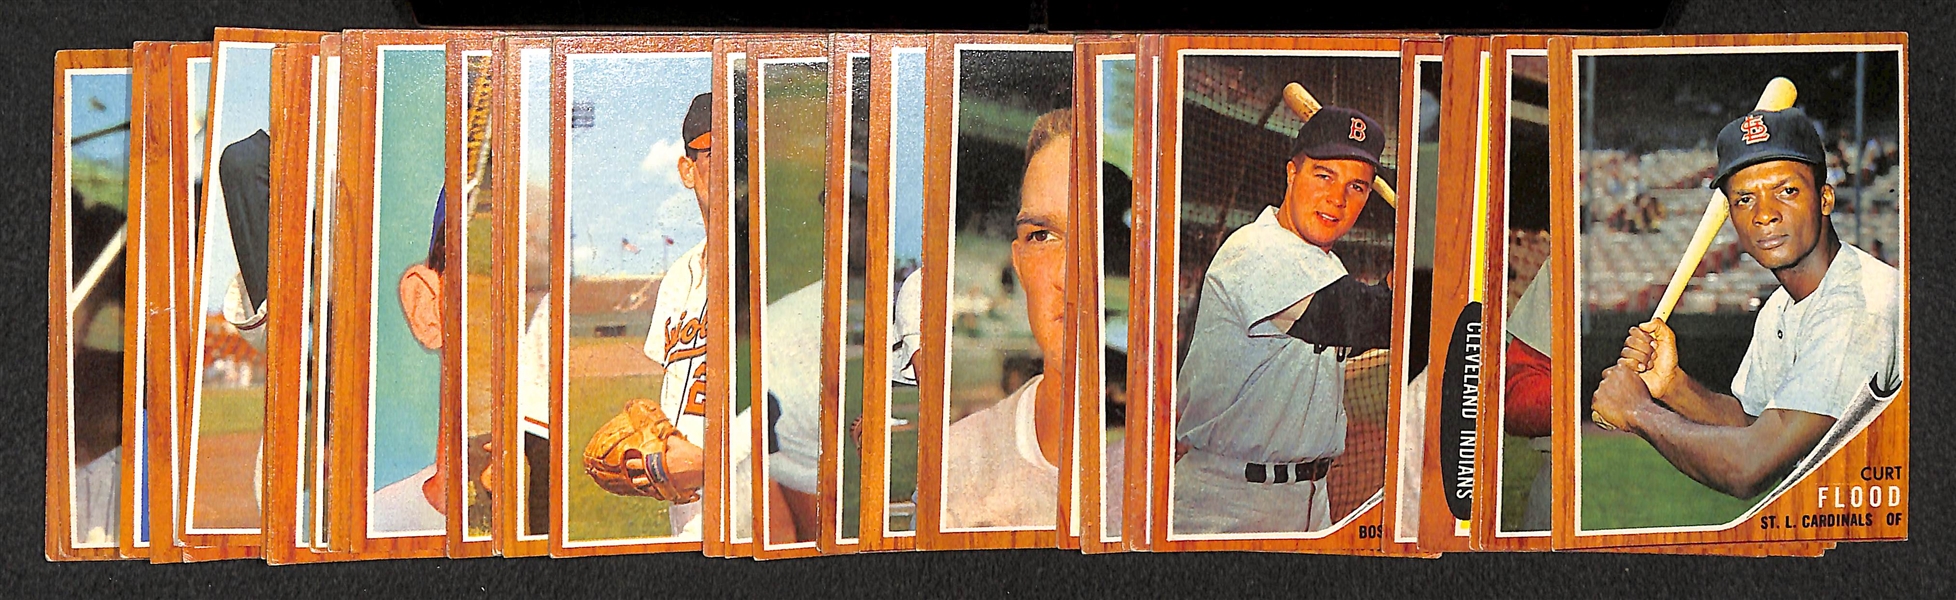 Lot of 51 Assorted 1962 Topps Baseball High Number Cards w. Curt Flood 